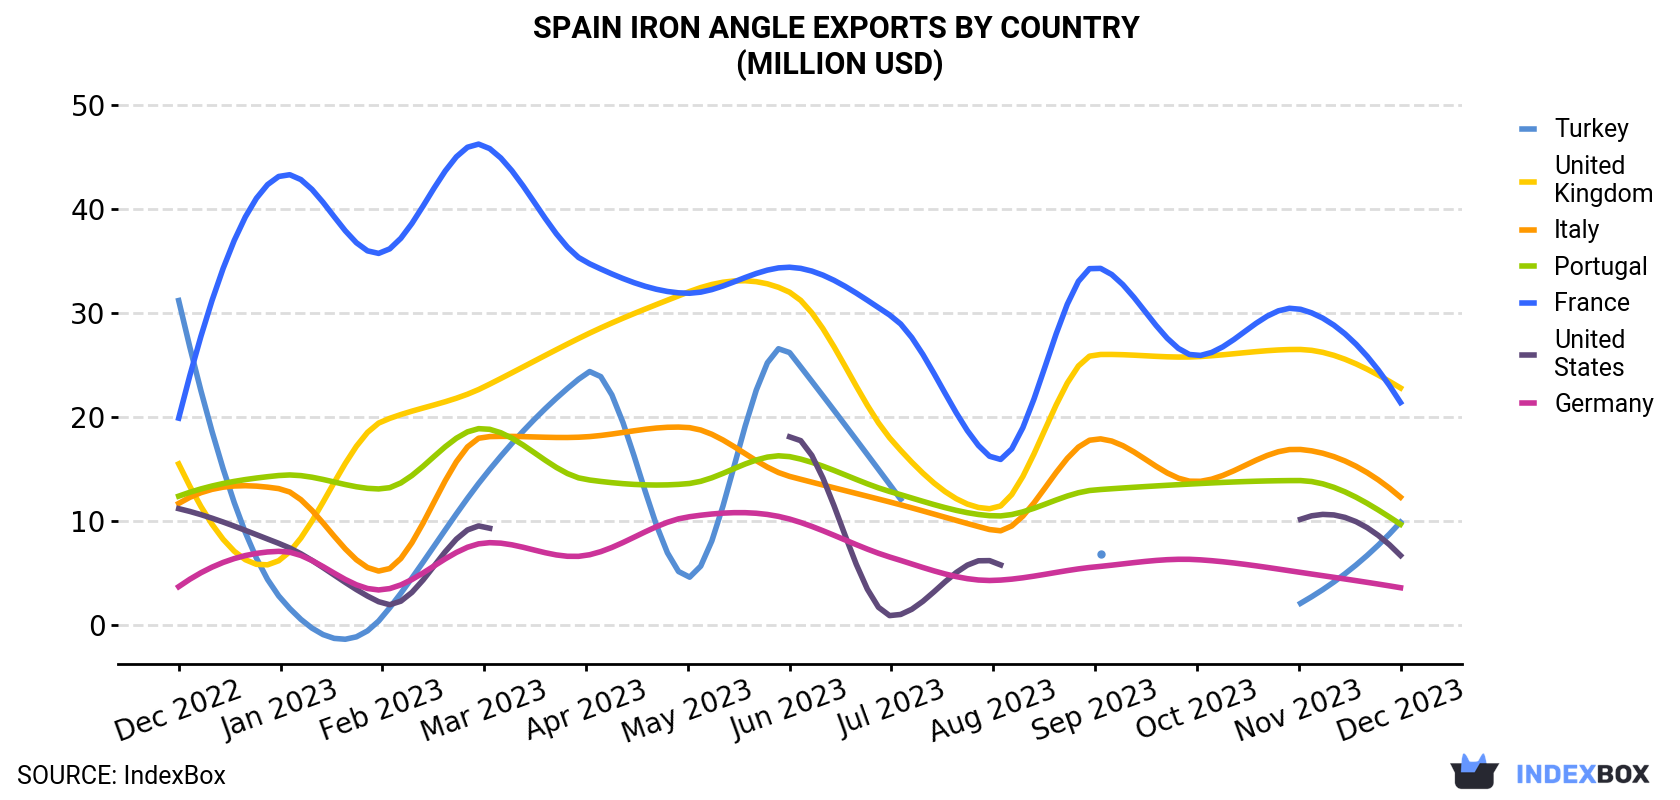 Spain Iron Angle Exports By Country (Million USD)